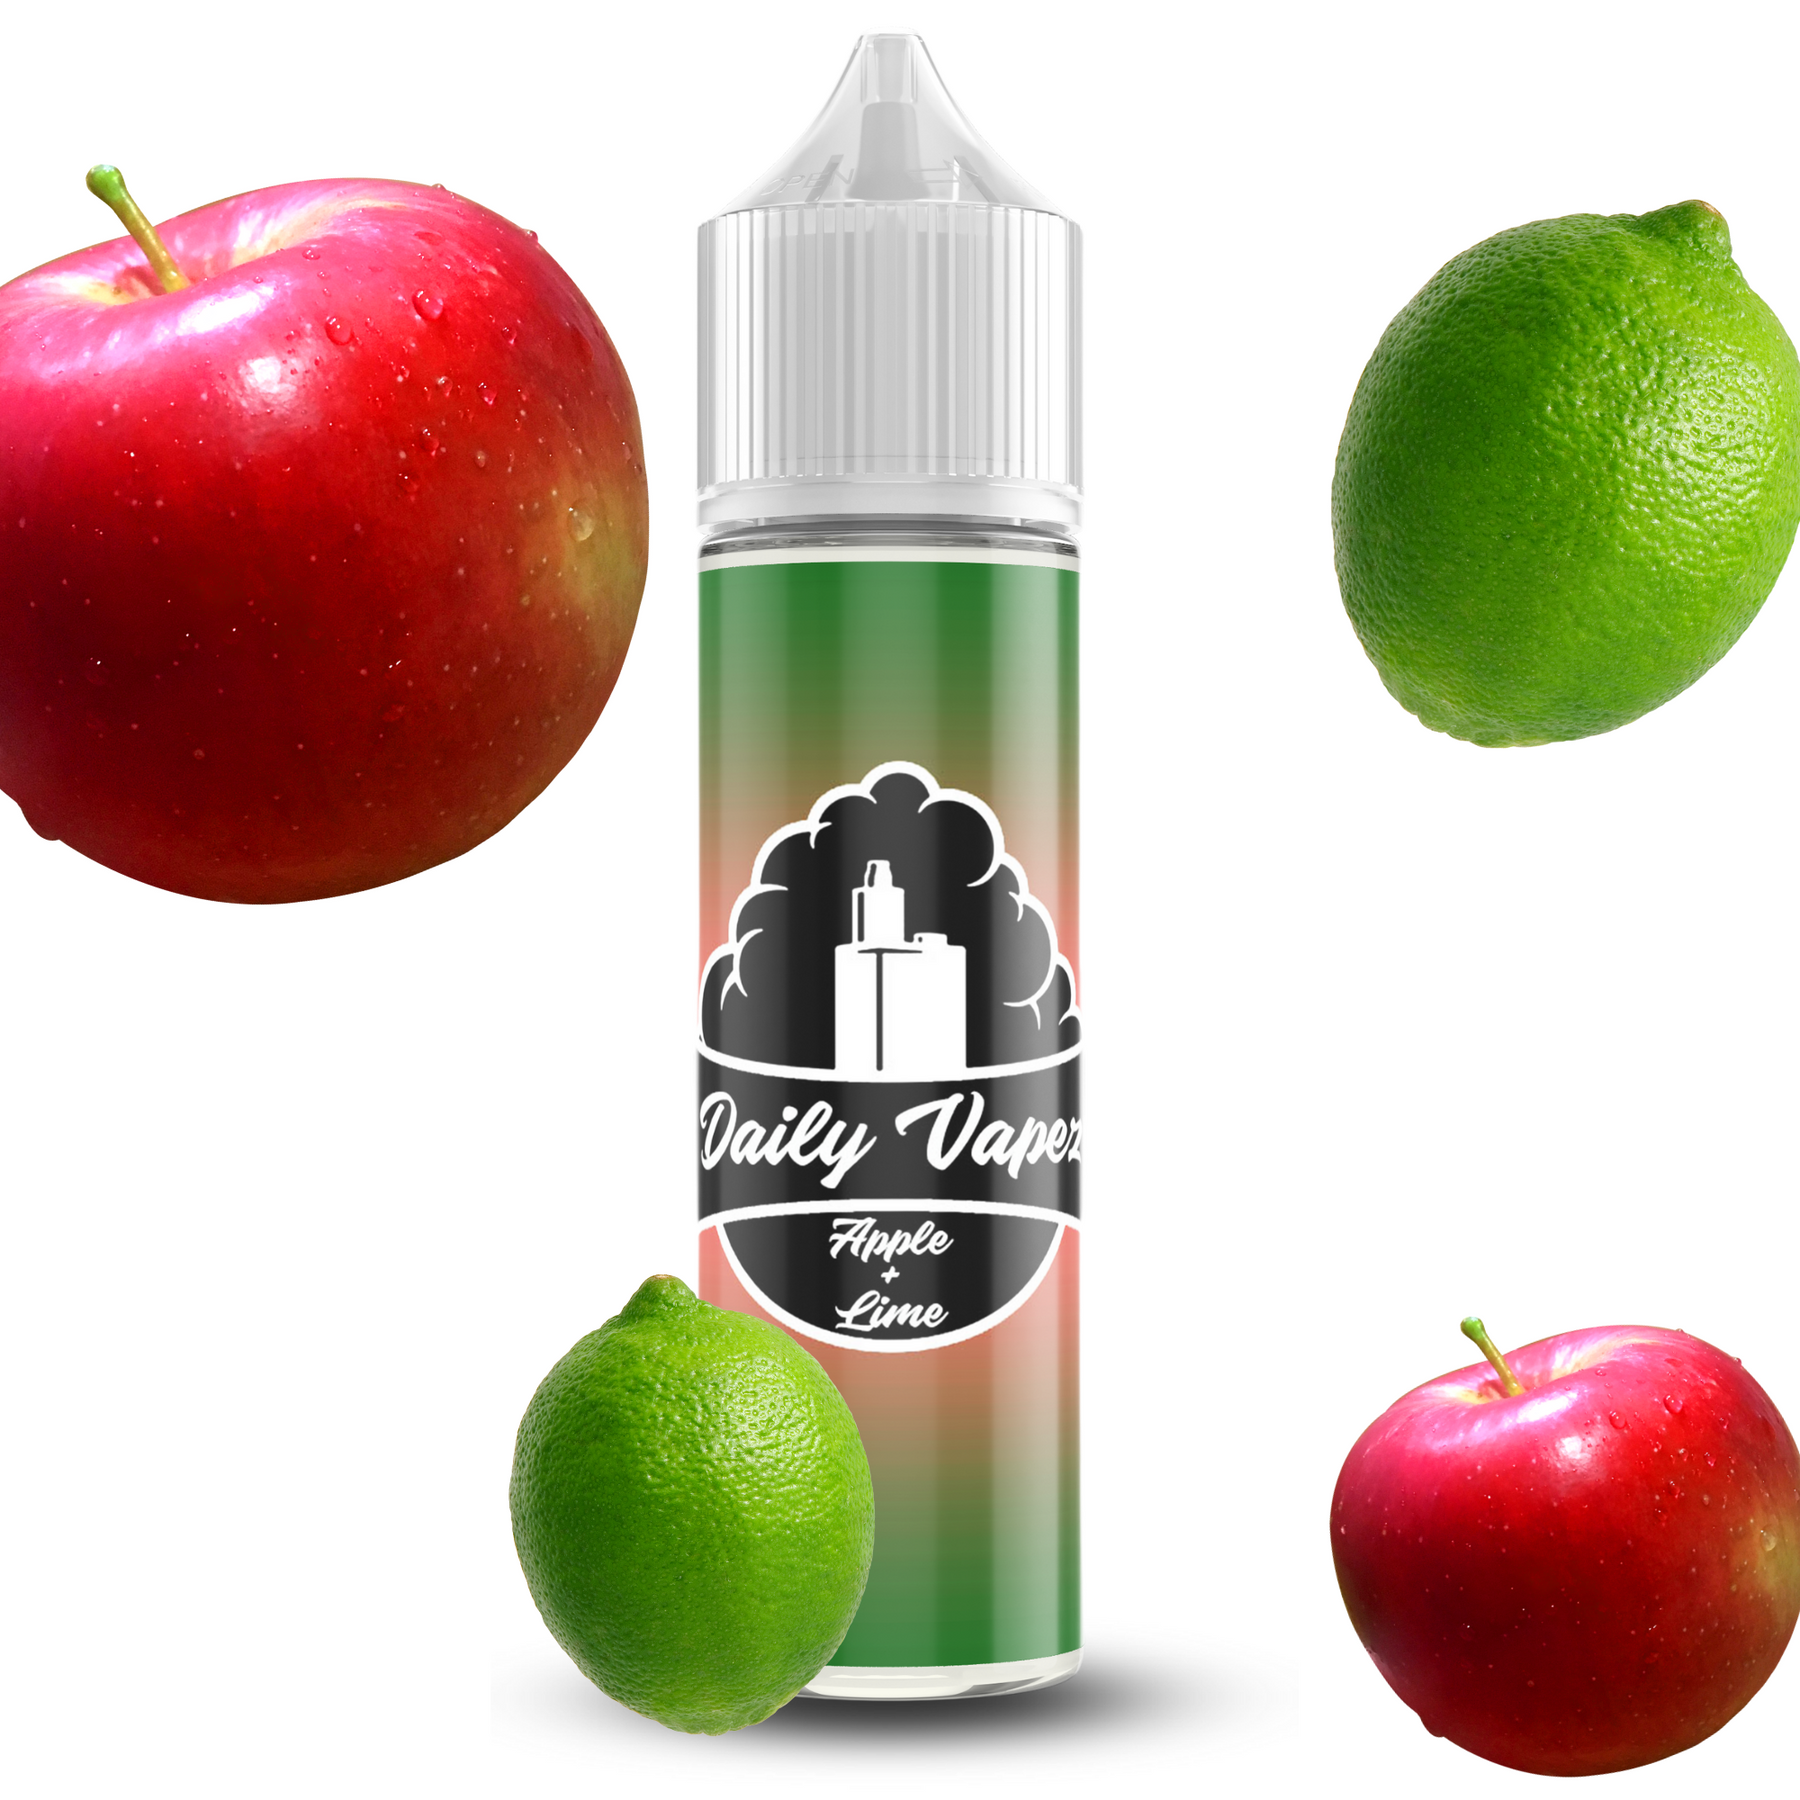 Daily Vapez - Apple & Lime